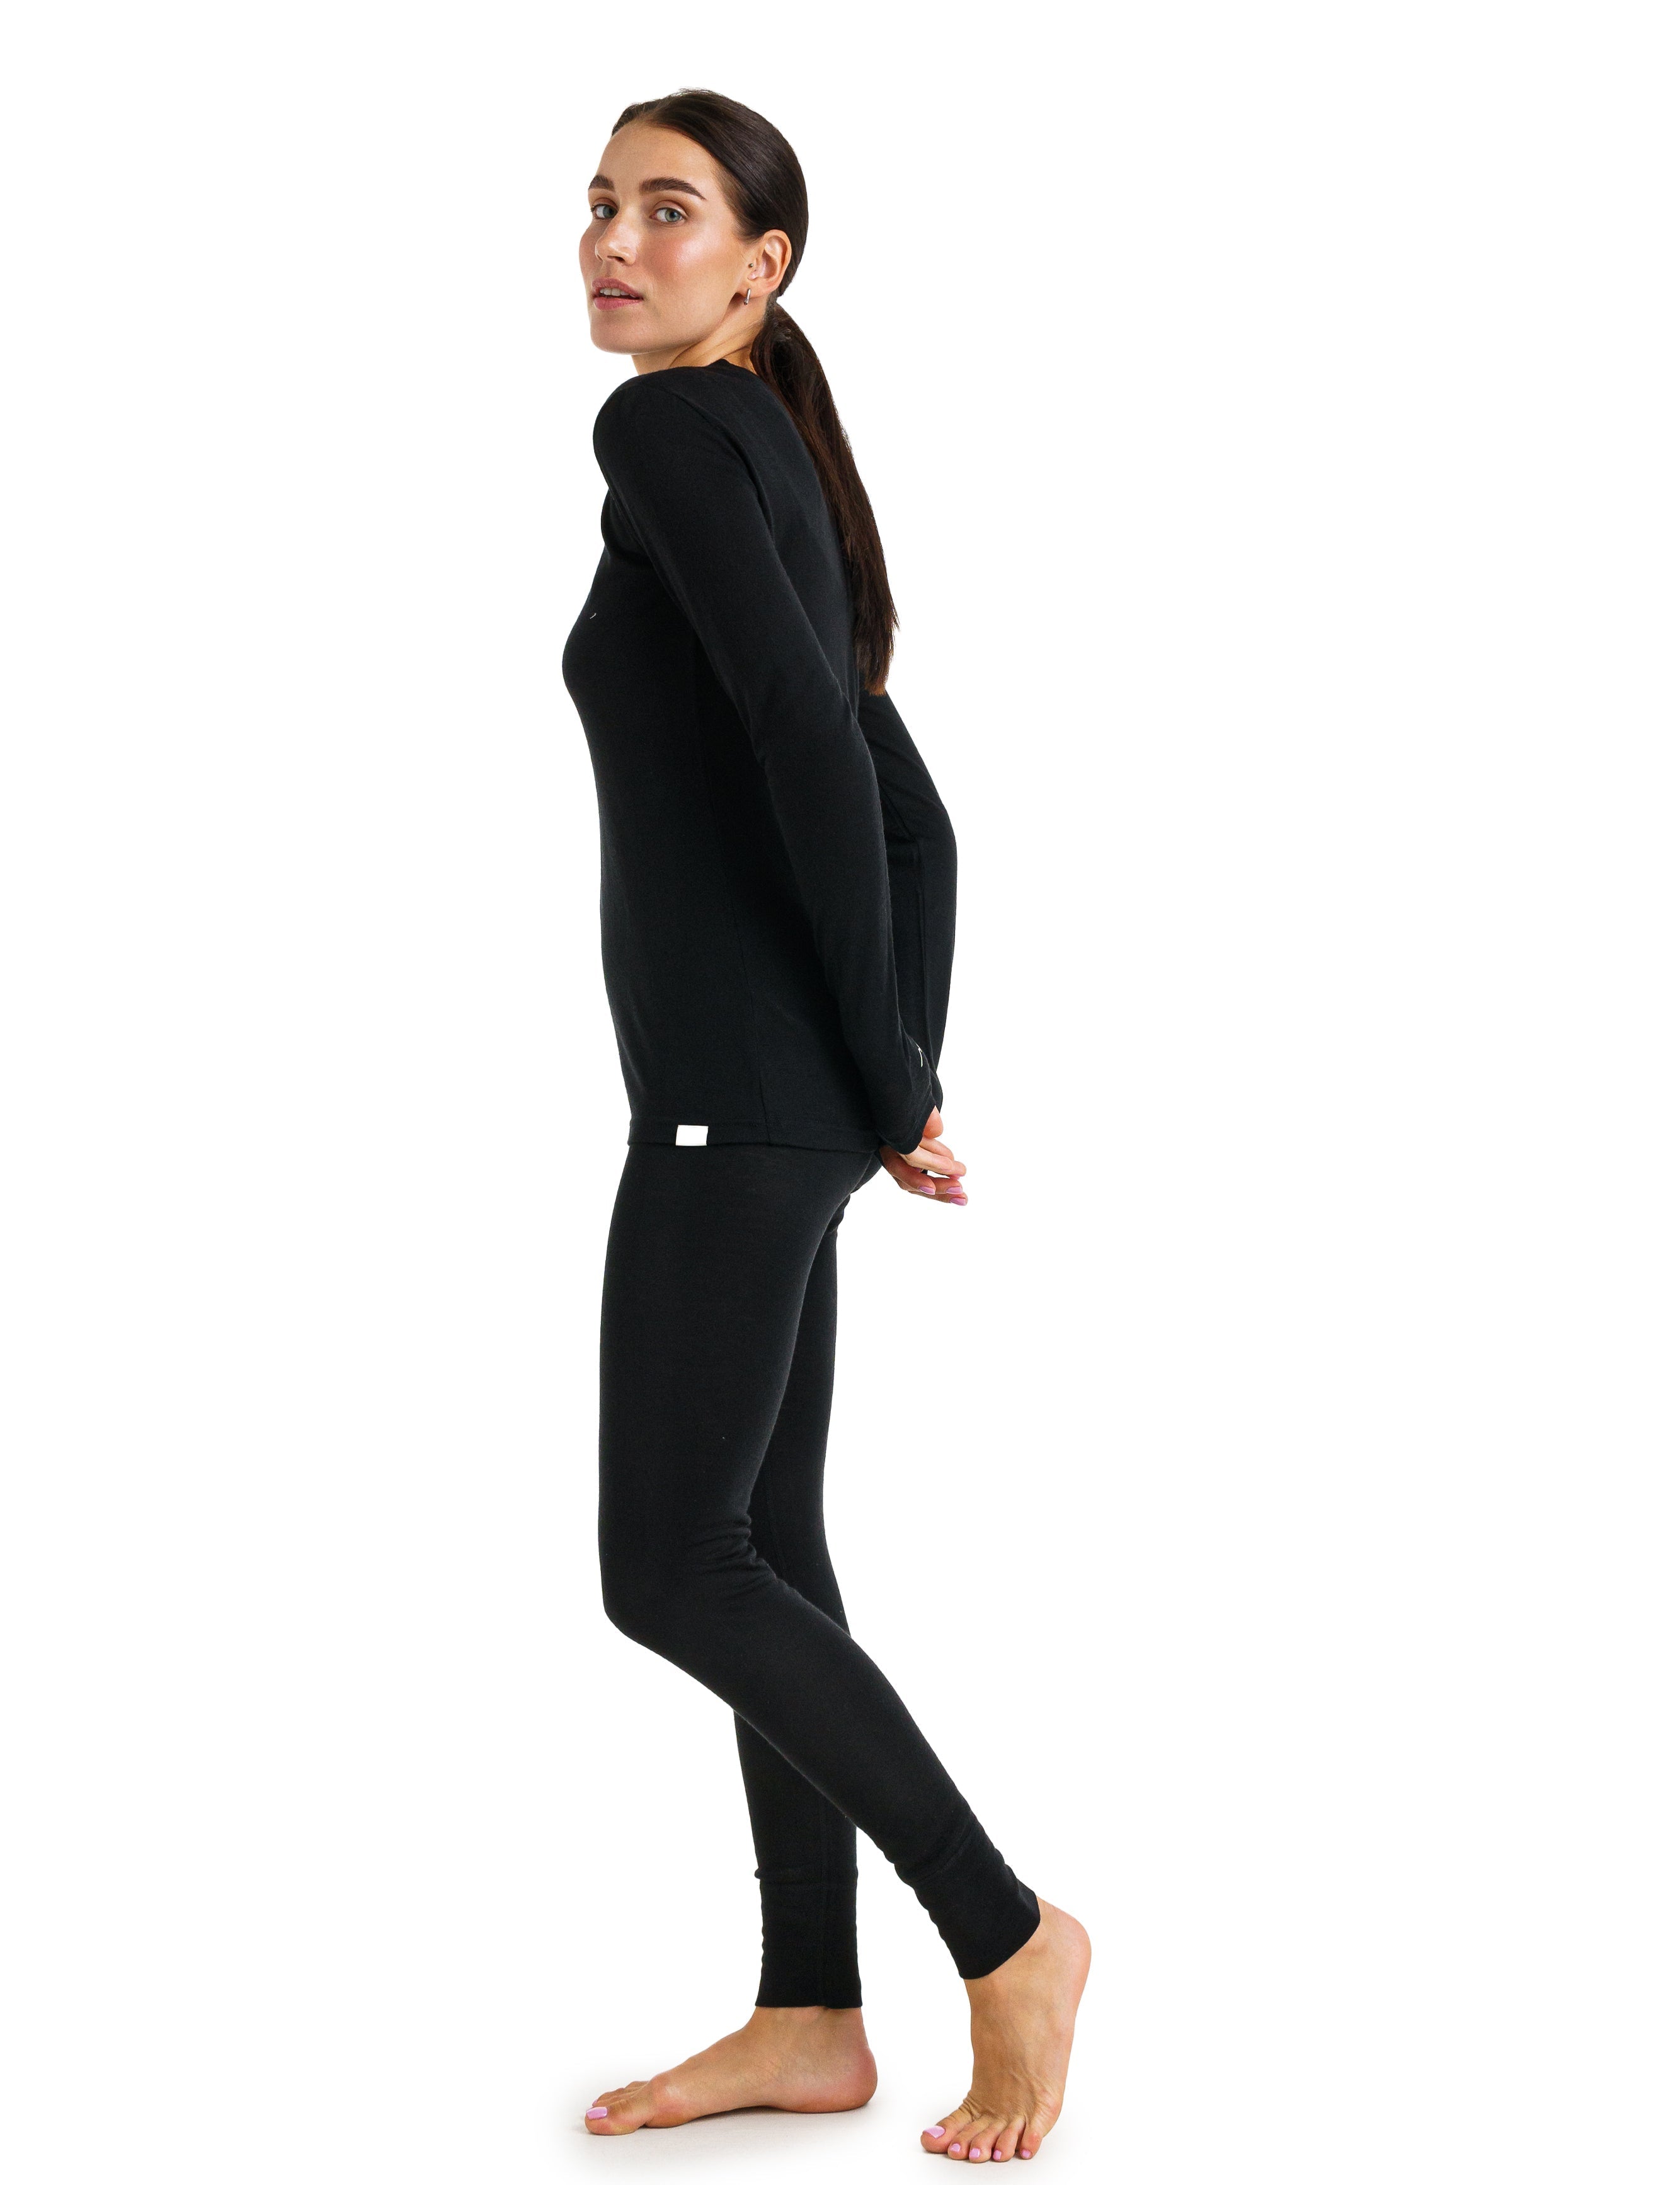 Wool Thermal Base Layer Set: Womens Spring Thermal Underwear With Long Johns,  Warmth & Comfort 231211 From Diao03, $45.75